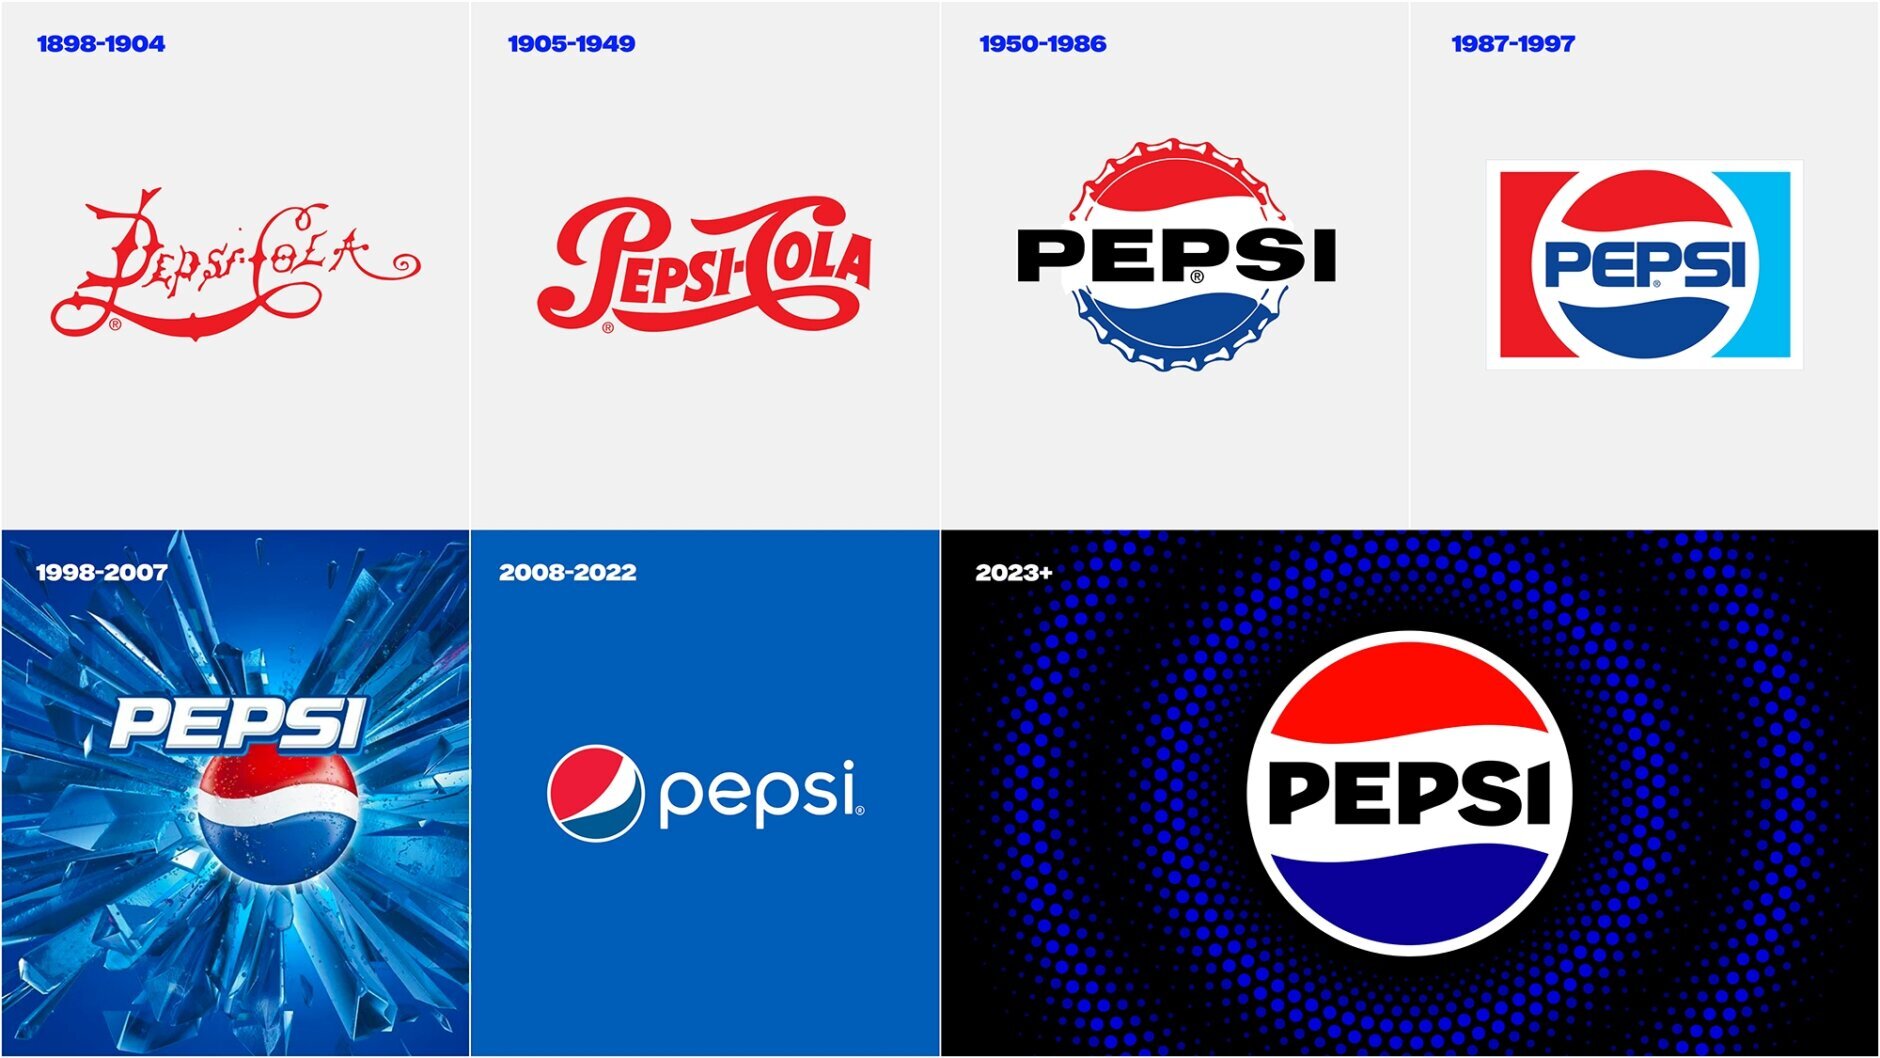 Pepsi has changed its logo over the years.